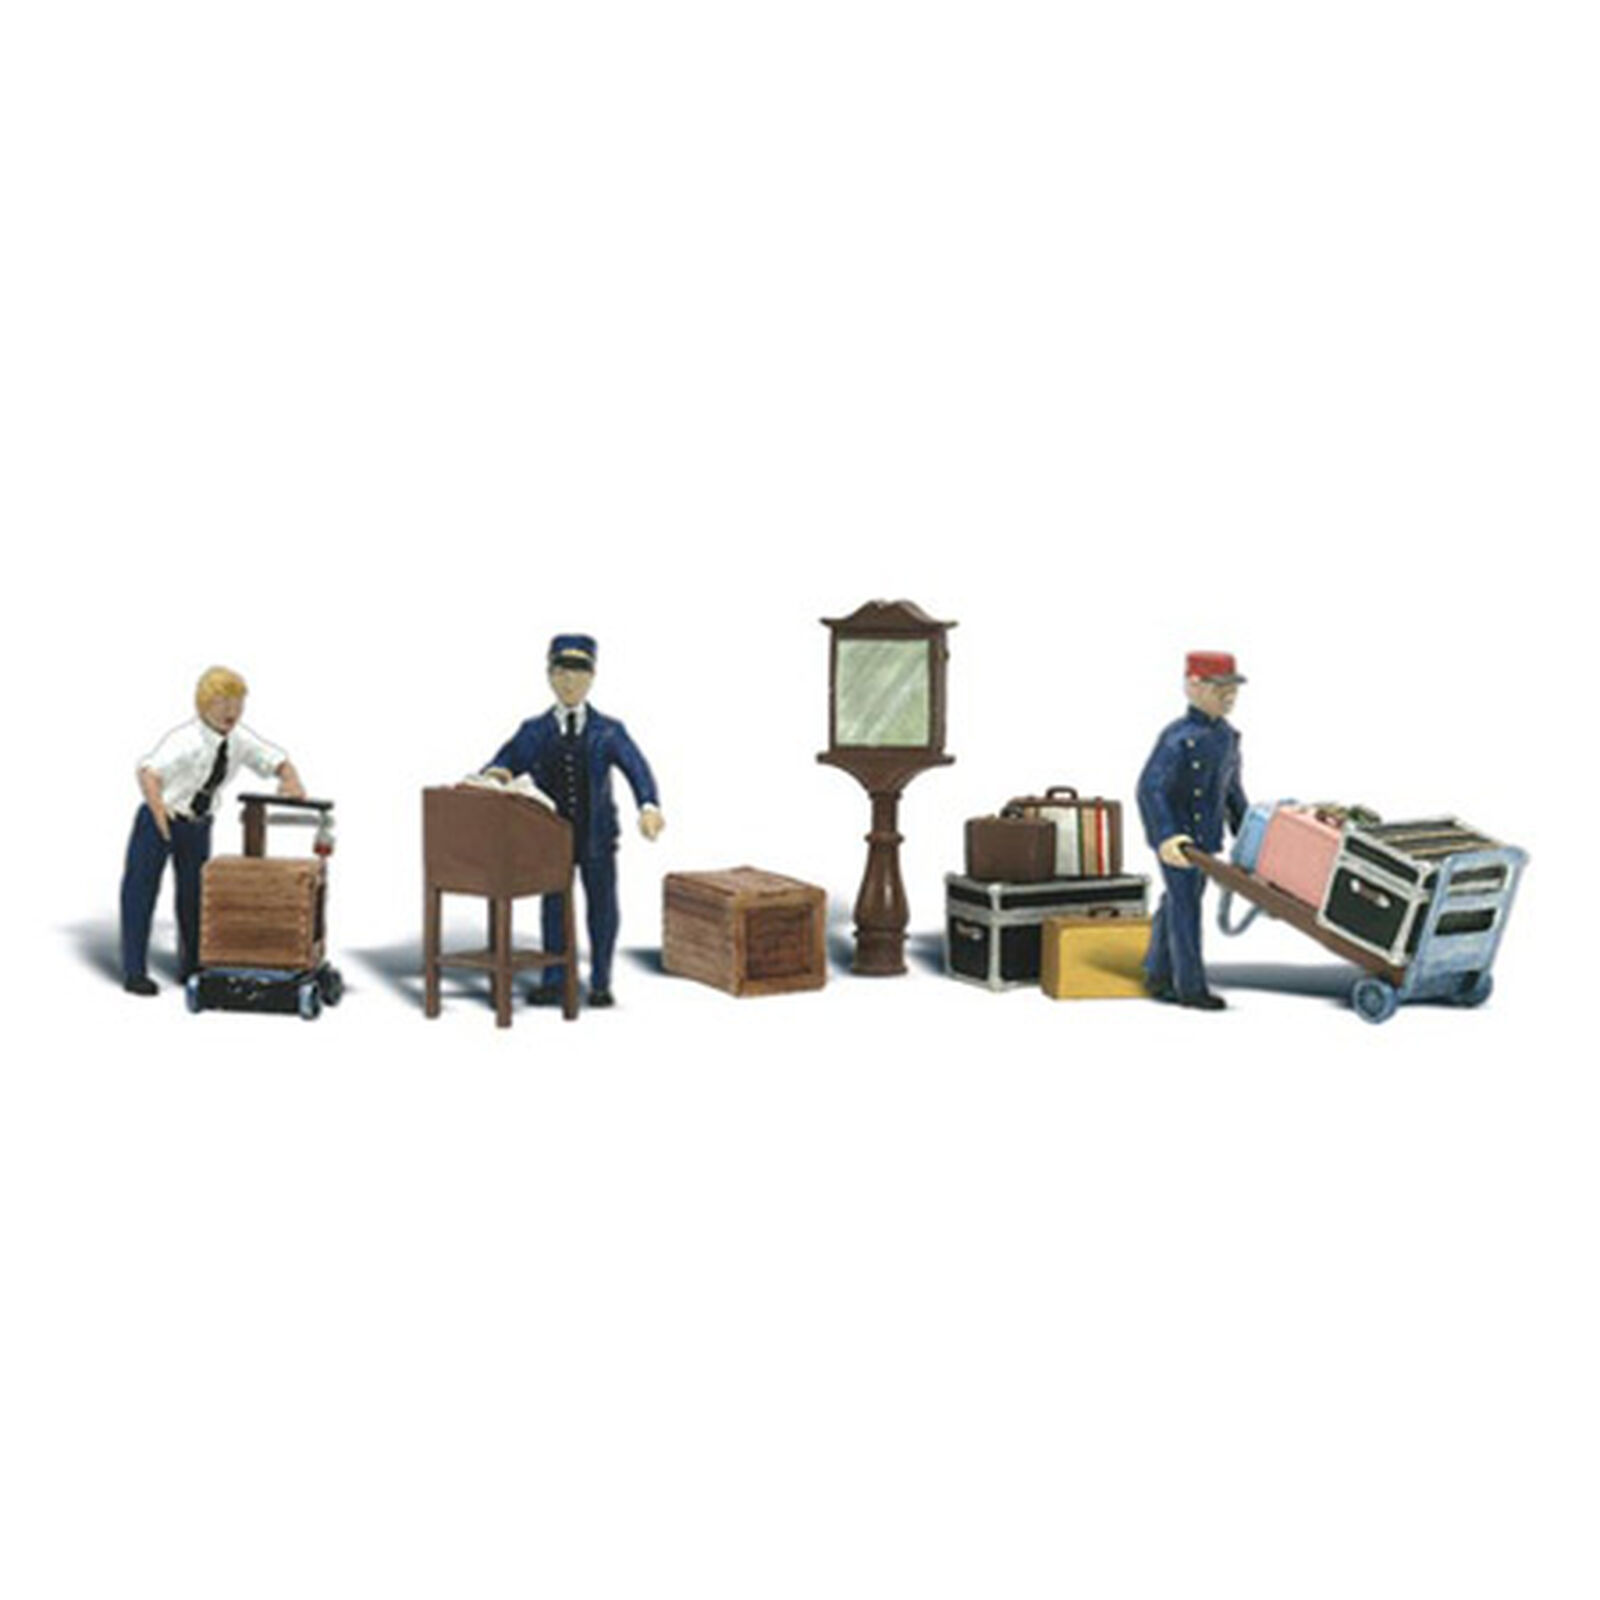 O Depot Workers & Accessories